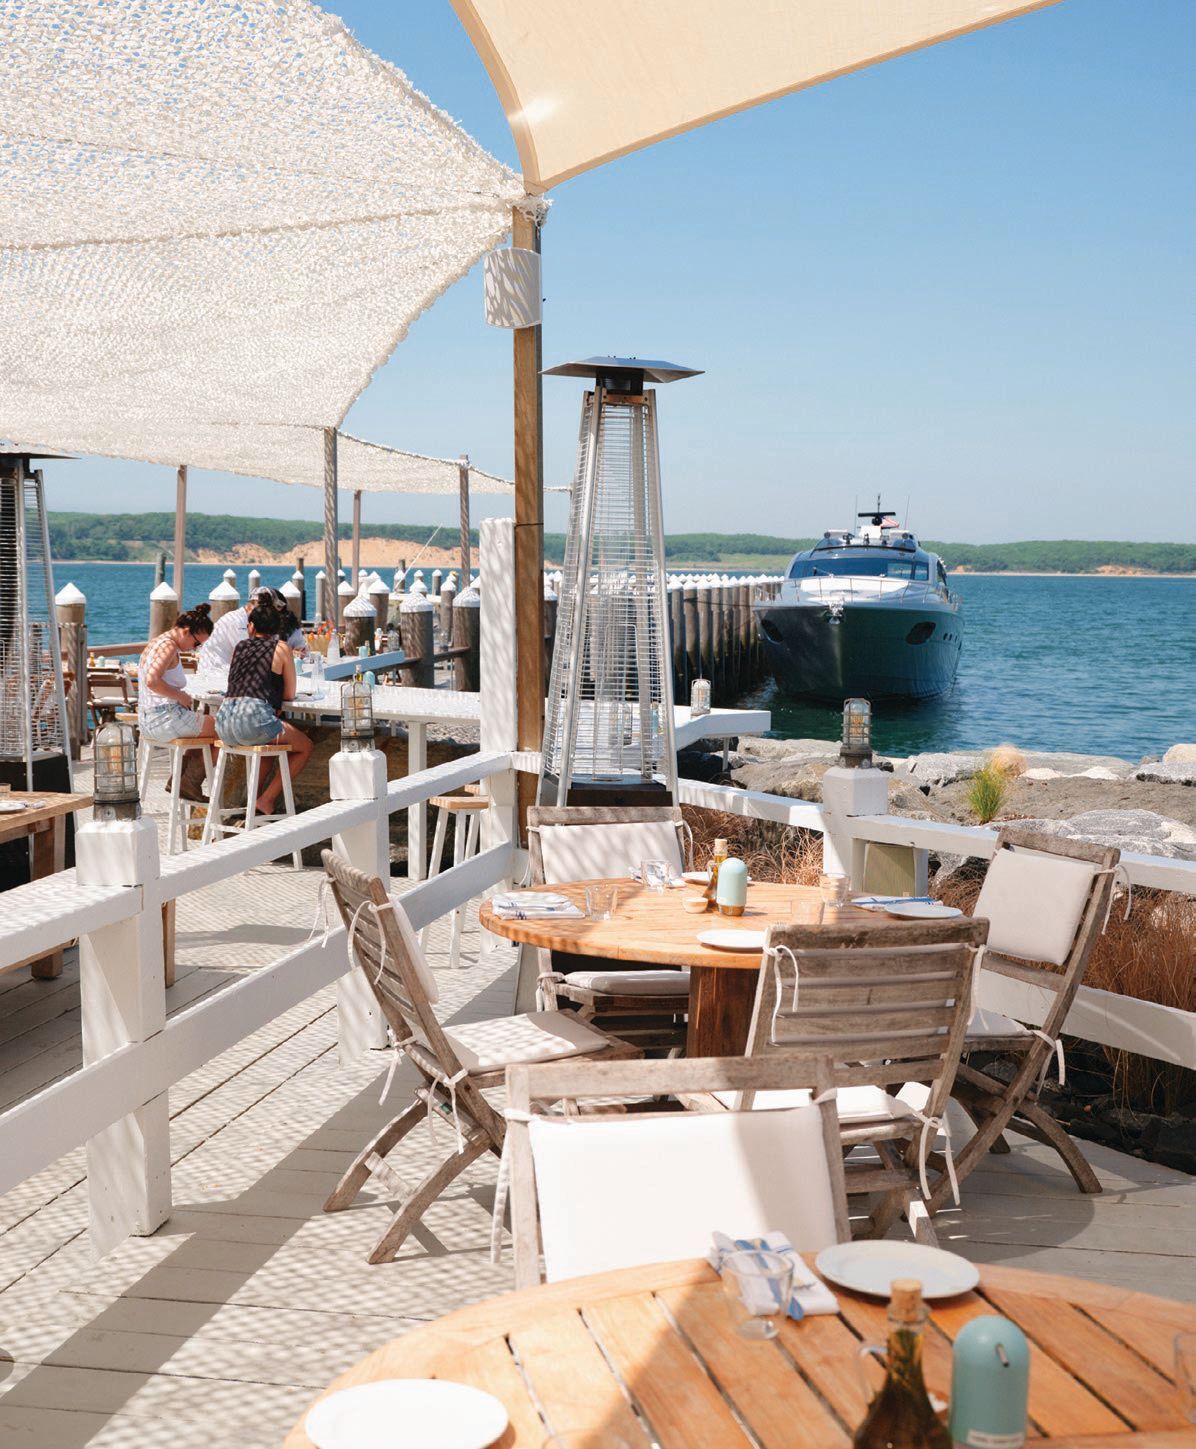 Duryea’s Montauk is seaside and delicious DURYEA’S ORIENT POINT PHOTO BY DOUG YOUNG 